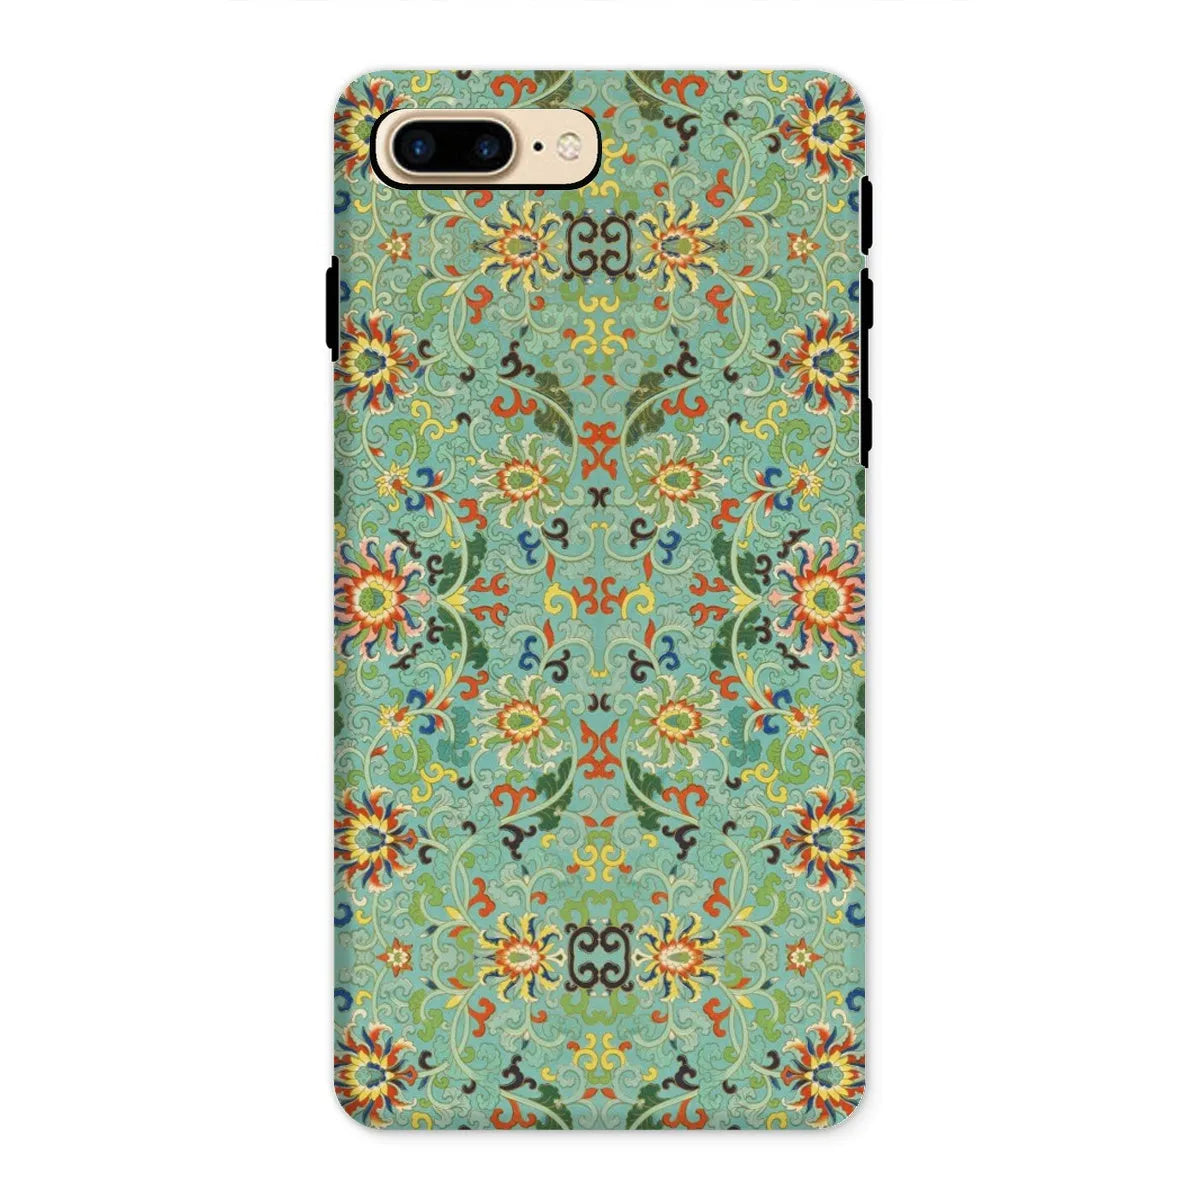 Lotus Candy - Chinese Aesthetic Pattern Art Phone Case - Iphone 8 Plus / Matte - Mobile Phone Cases - Aesthetic Art